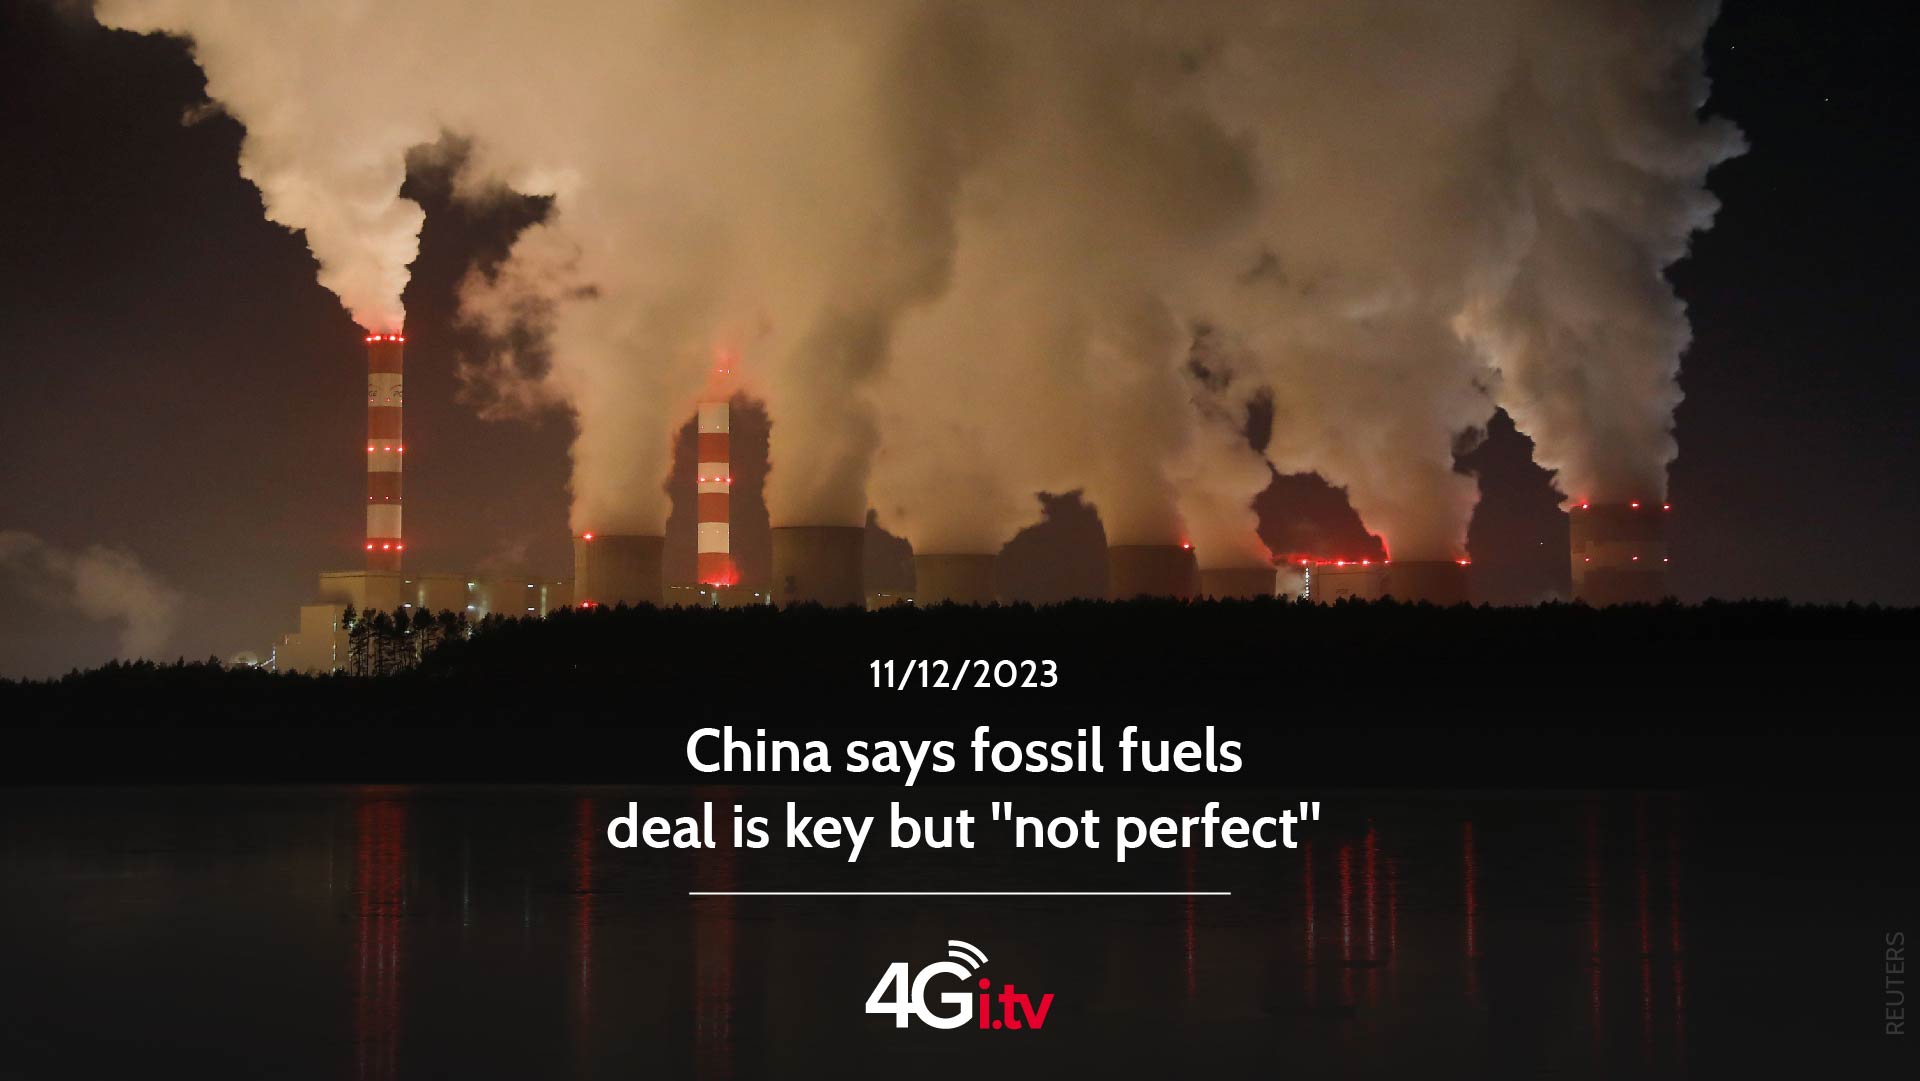 Lesen Sie mehr über den Artikel China says fossil fuels deal is key but “not perfect”